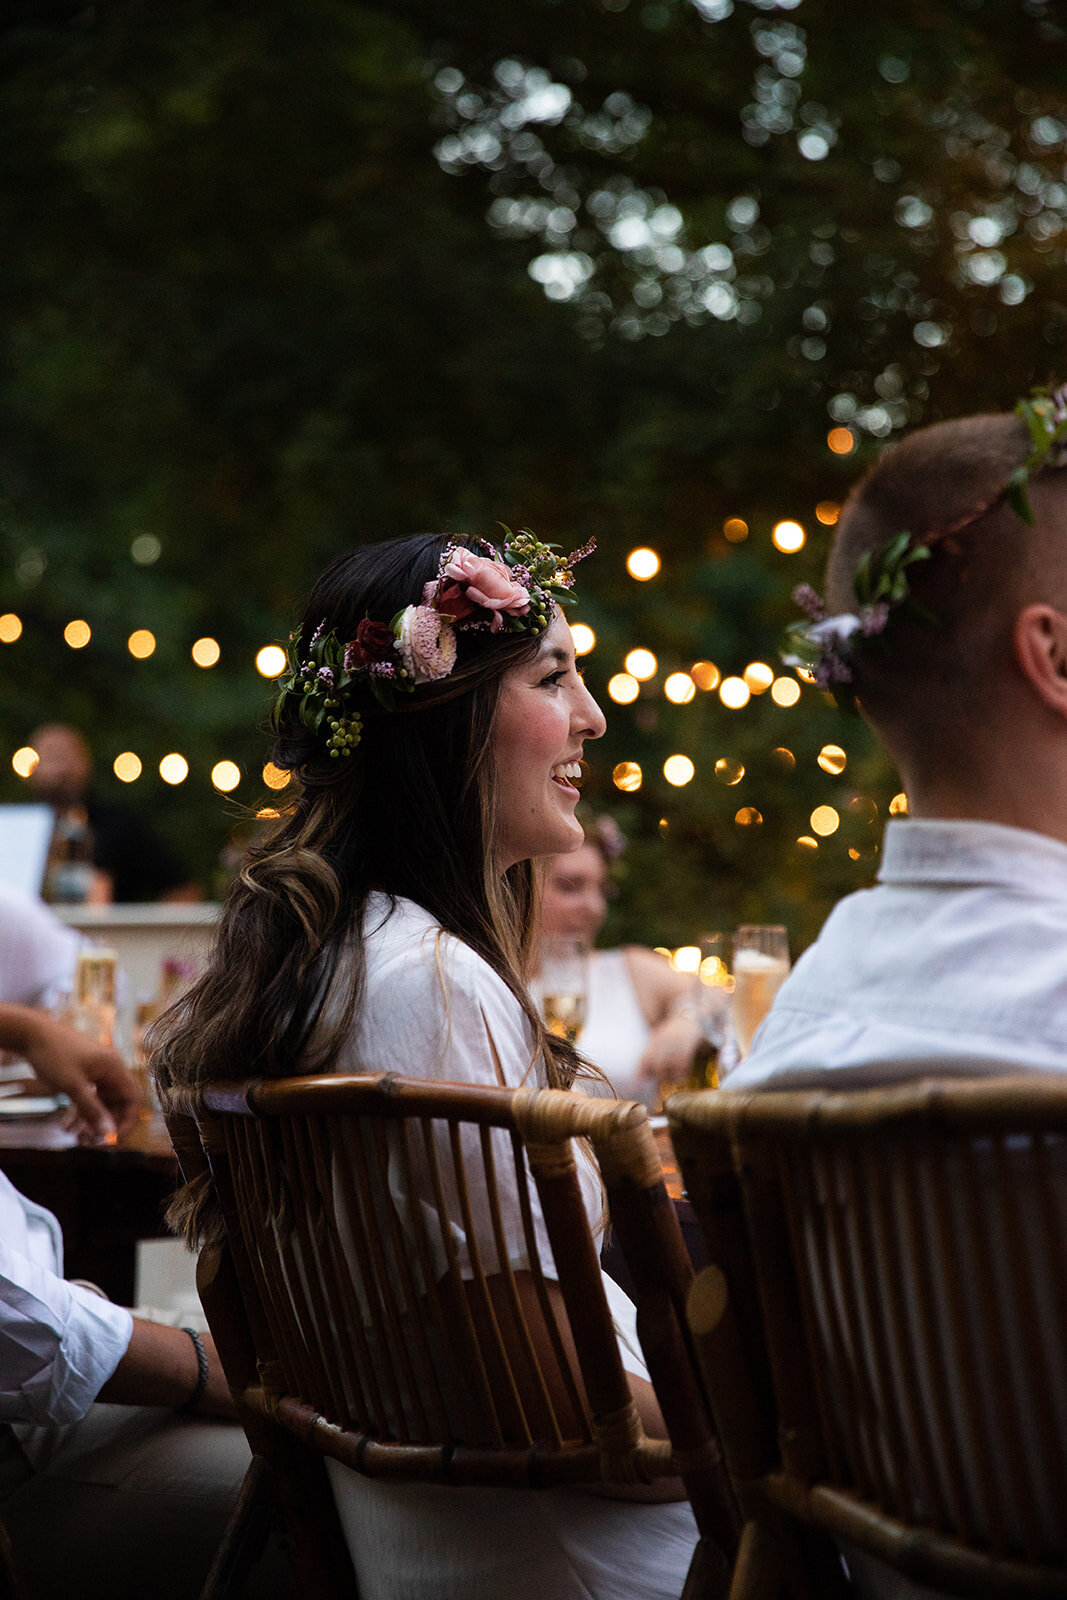 White linen welcome dinner with flower crown for every guest. Wildflower crown booth by Rosemary & Finch, RT Lodge and Nashville luxury wedding florist.